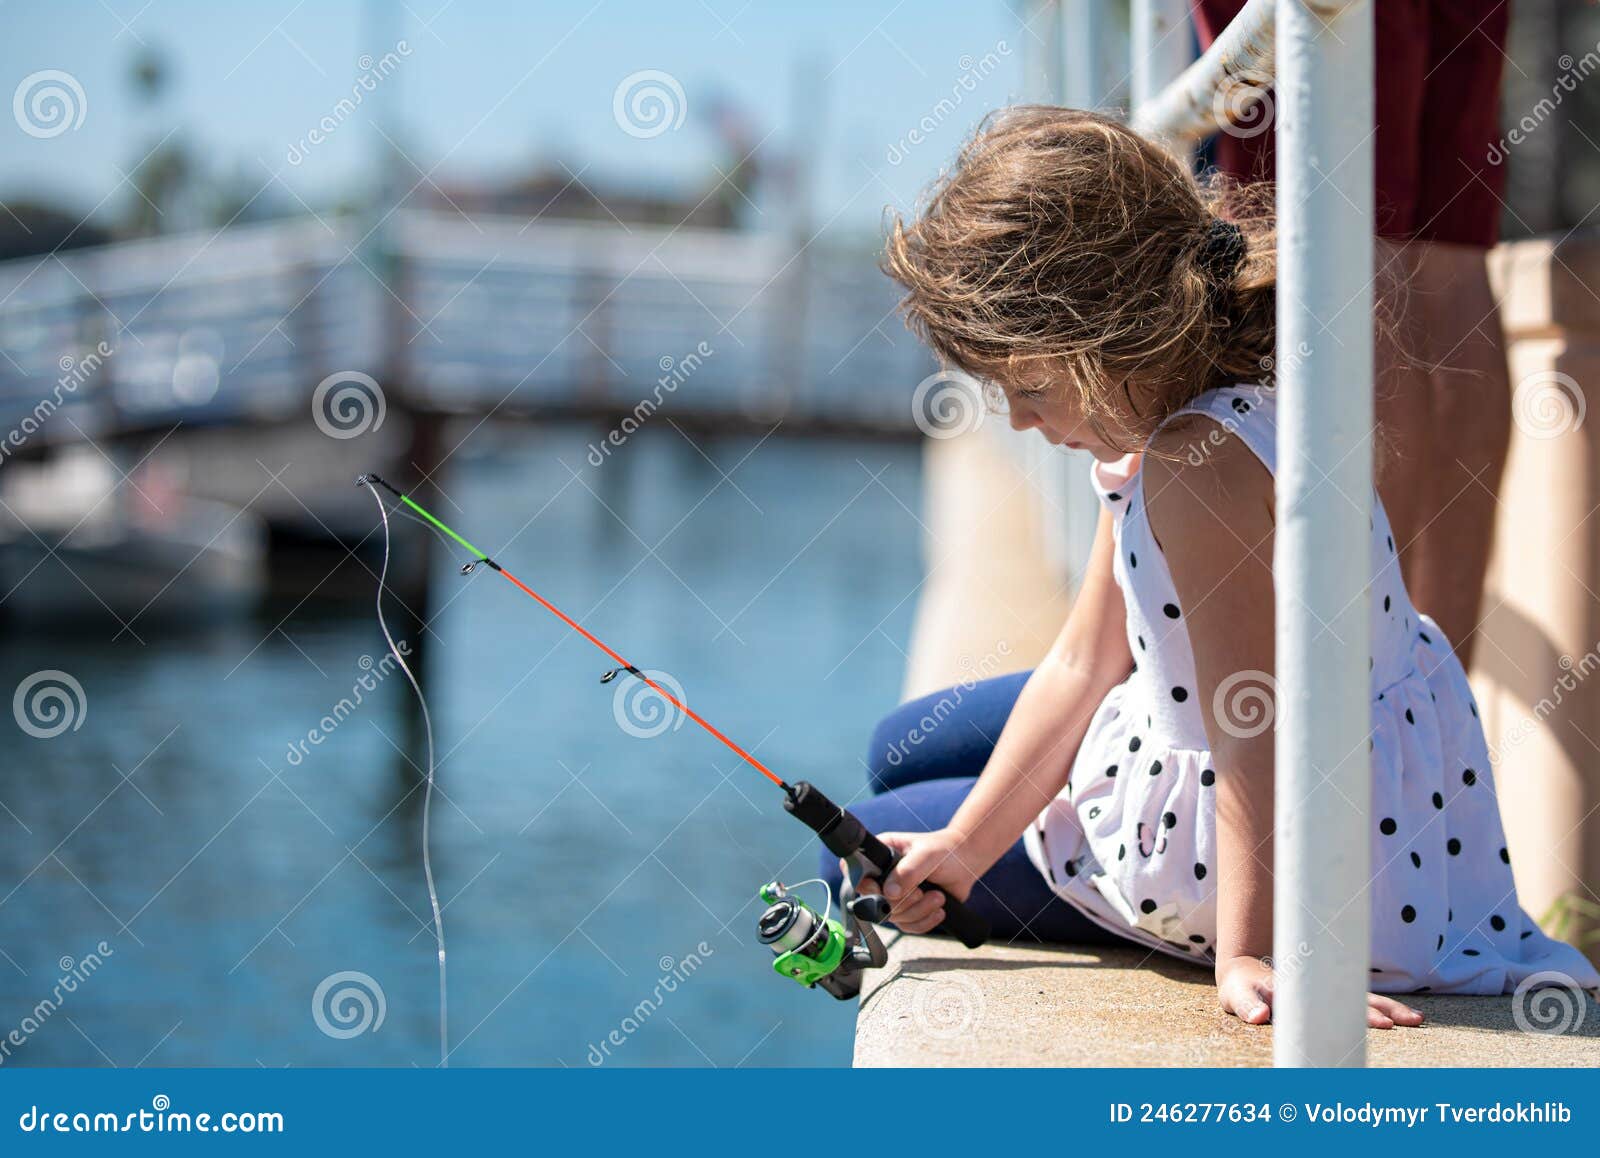 Focused, Serious, Little Children Girl Catch a Fish by a Fishing